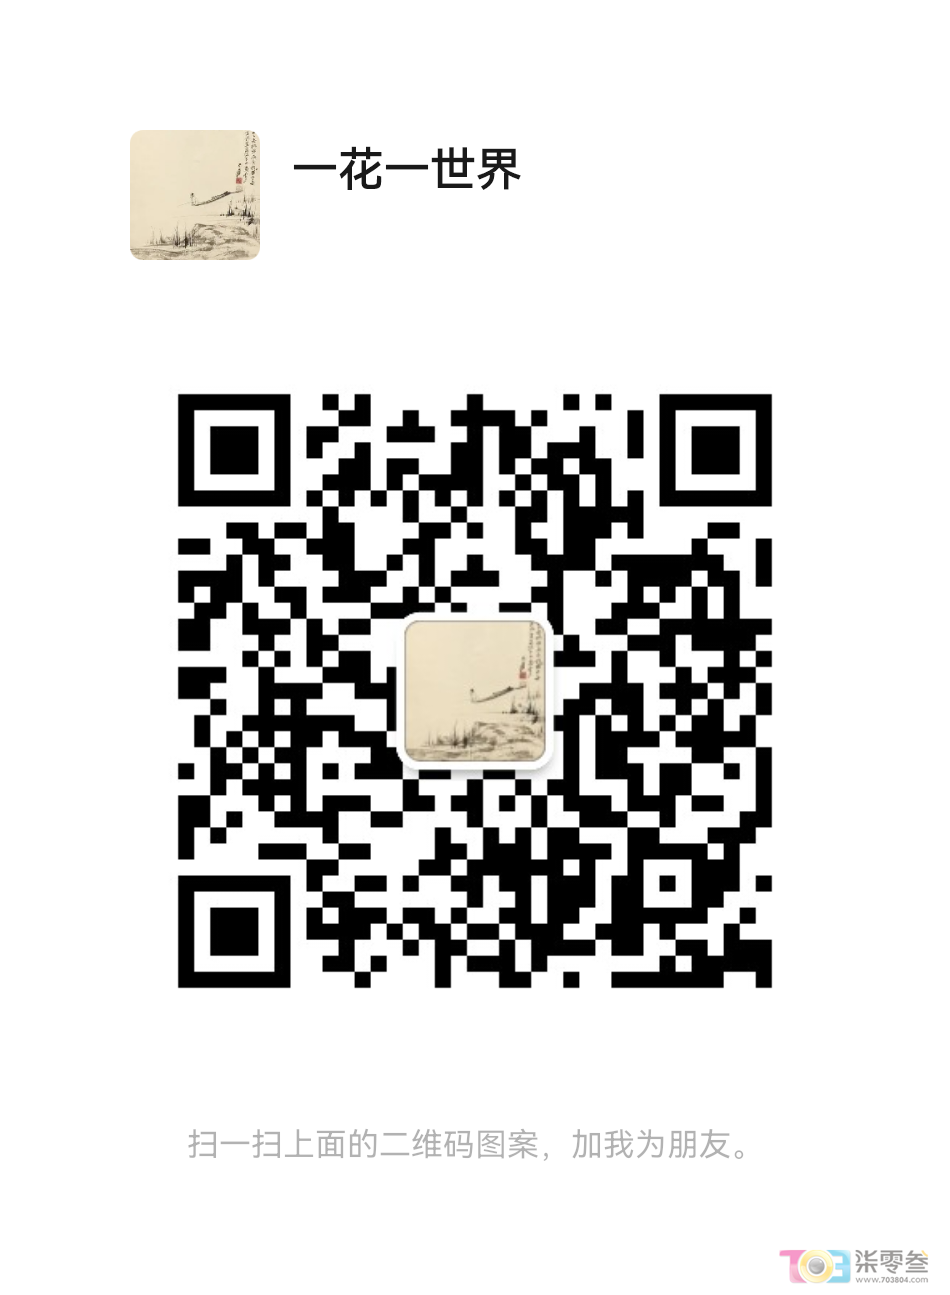 mmqrcode1686657143305.png